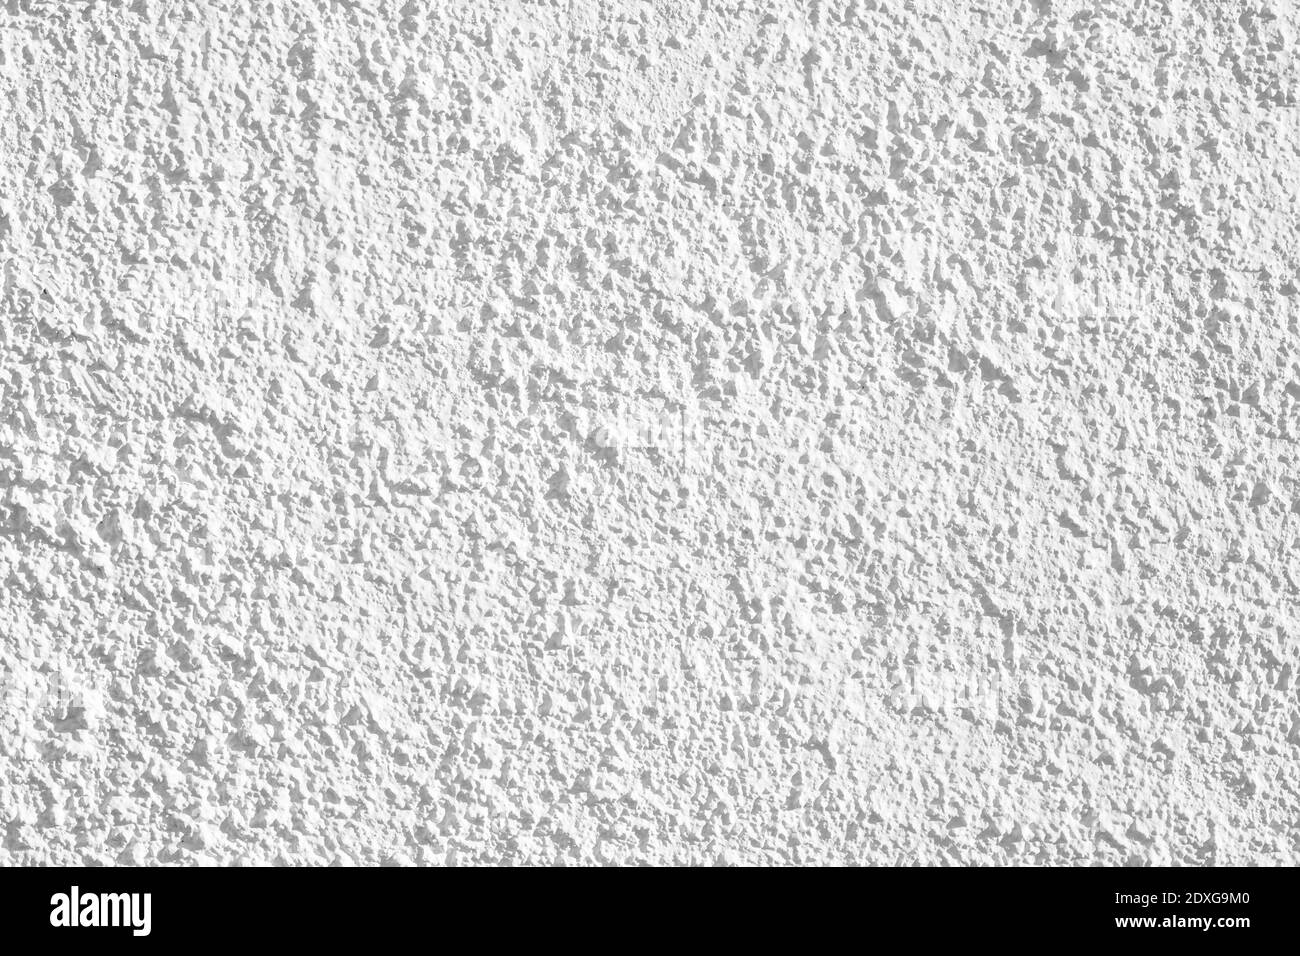 A White cement texture stone concrete,rock plastered stucco wall; painted flat fade pastel background white grey solid floor grain. Rough top Stock Photo